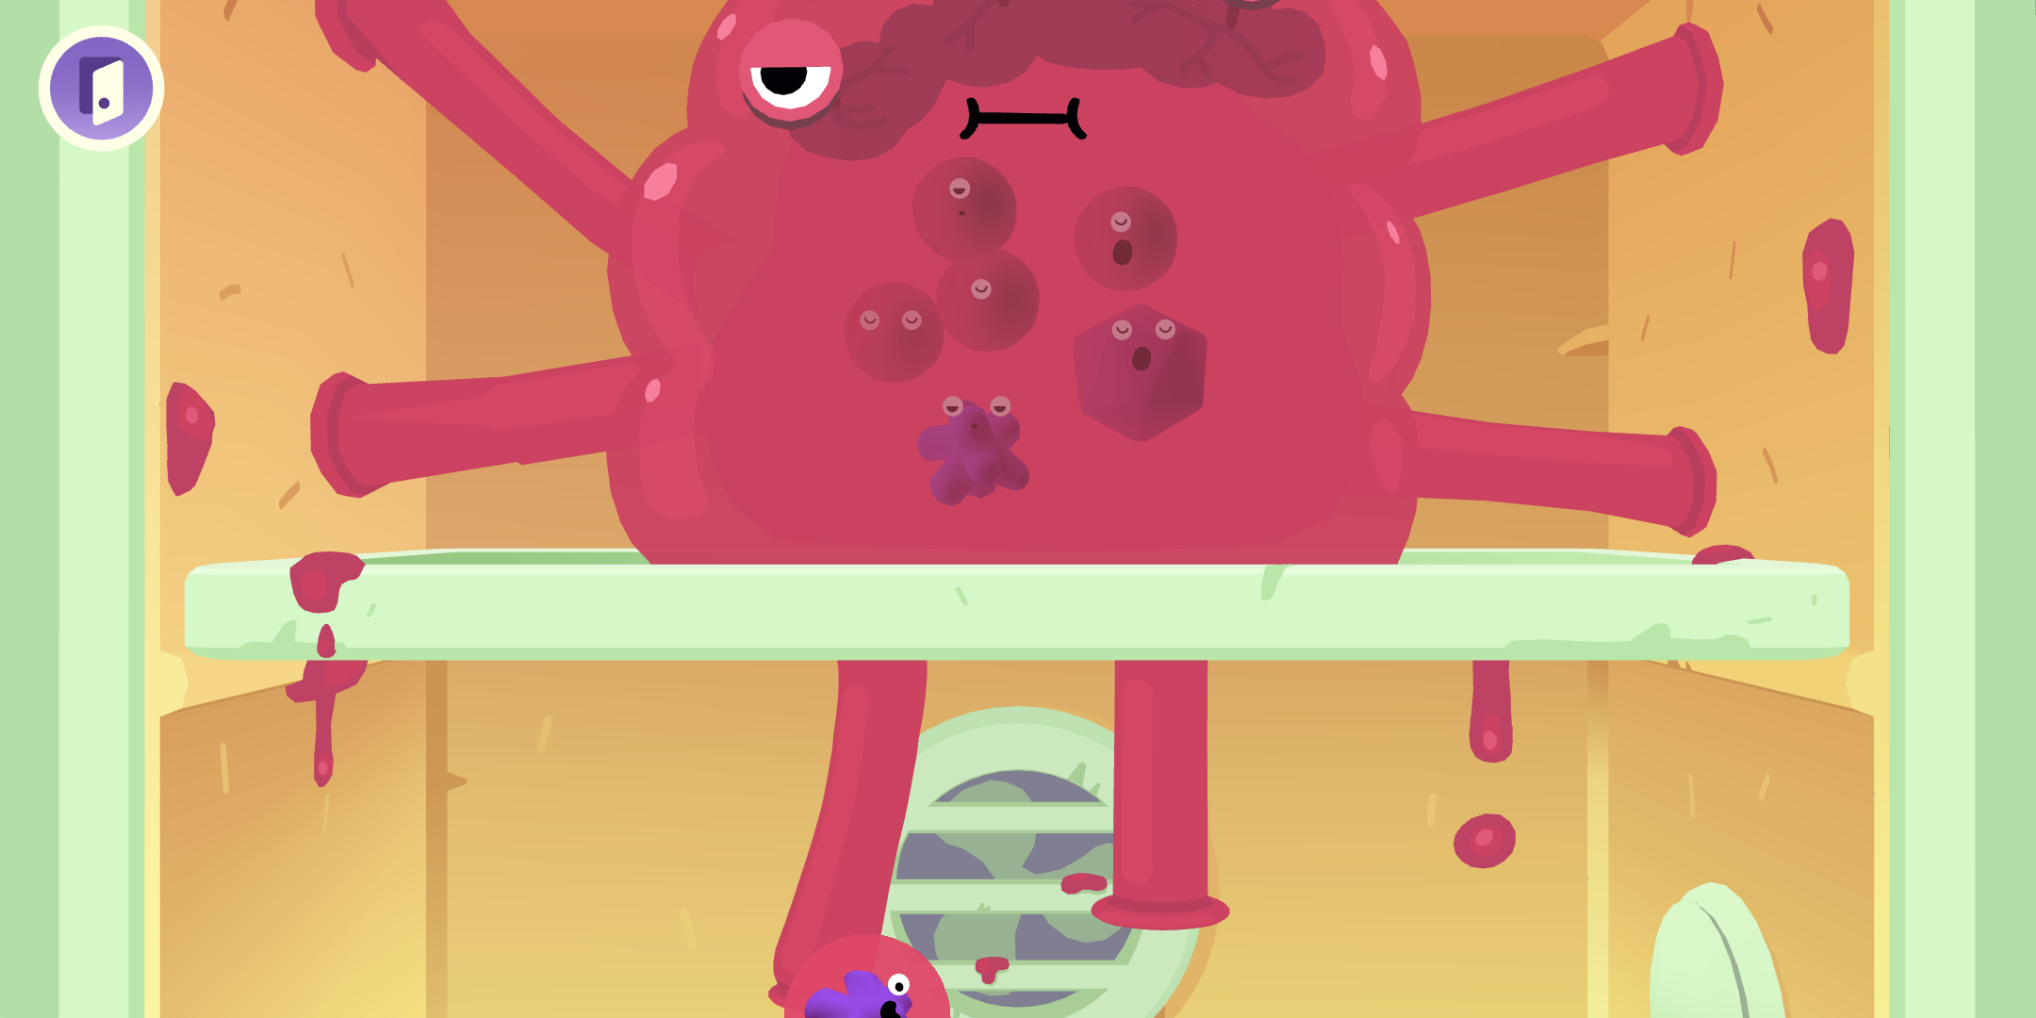 Goo globules float in a vaguely gelatinous goo monster. Hands down the most unpleasant thing in the game tbh.